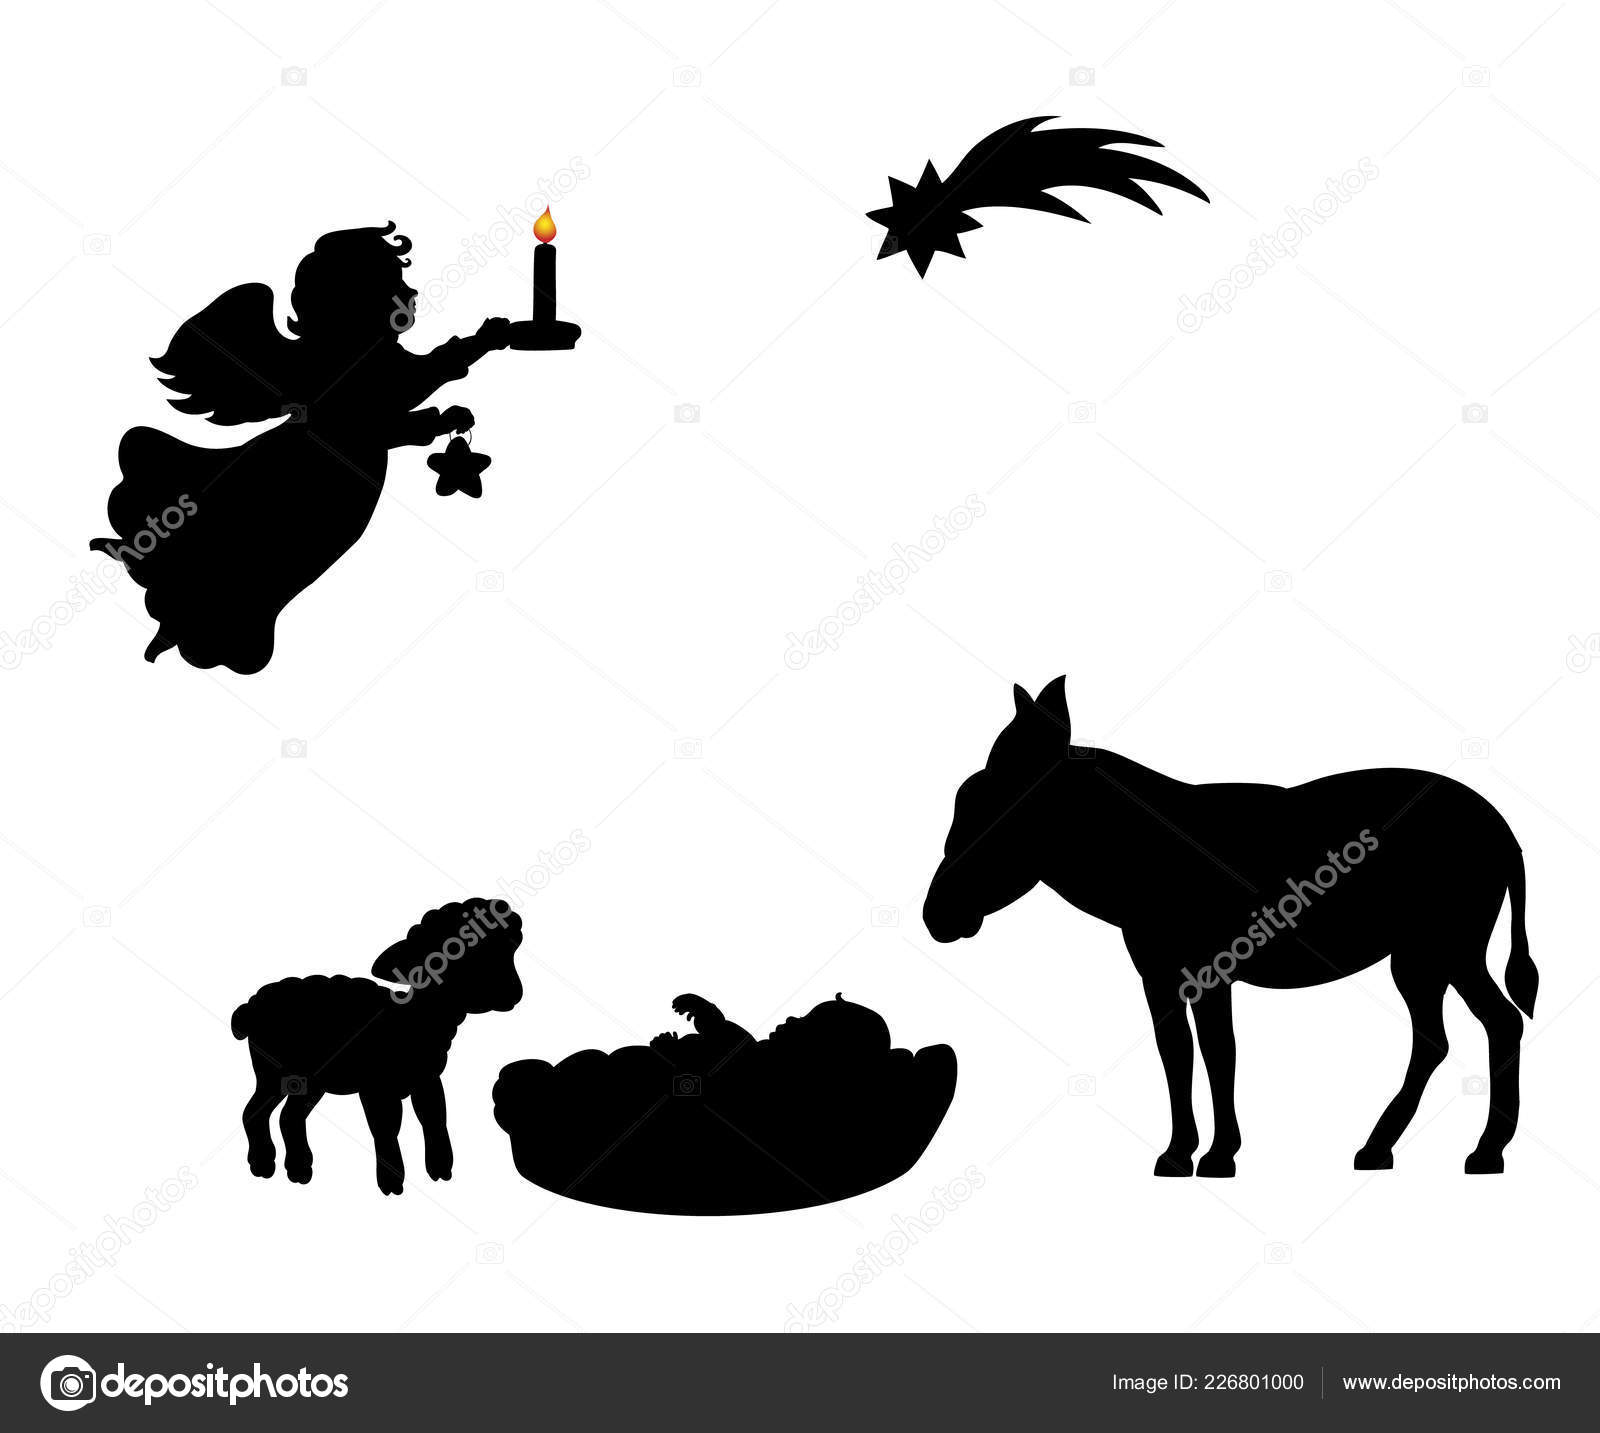 Silhouette Angel Babe Lamb Donkey And Christmas Star Vector Image By C Kozyrevaelena Vector Stock